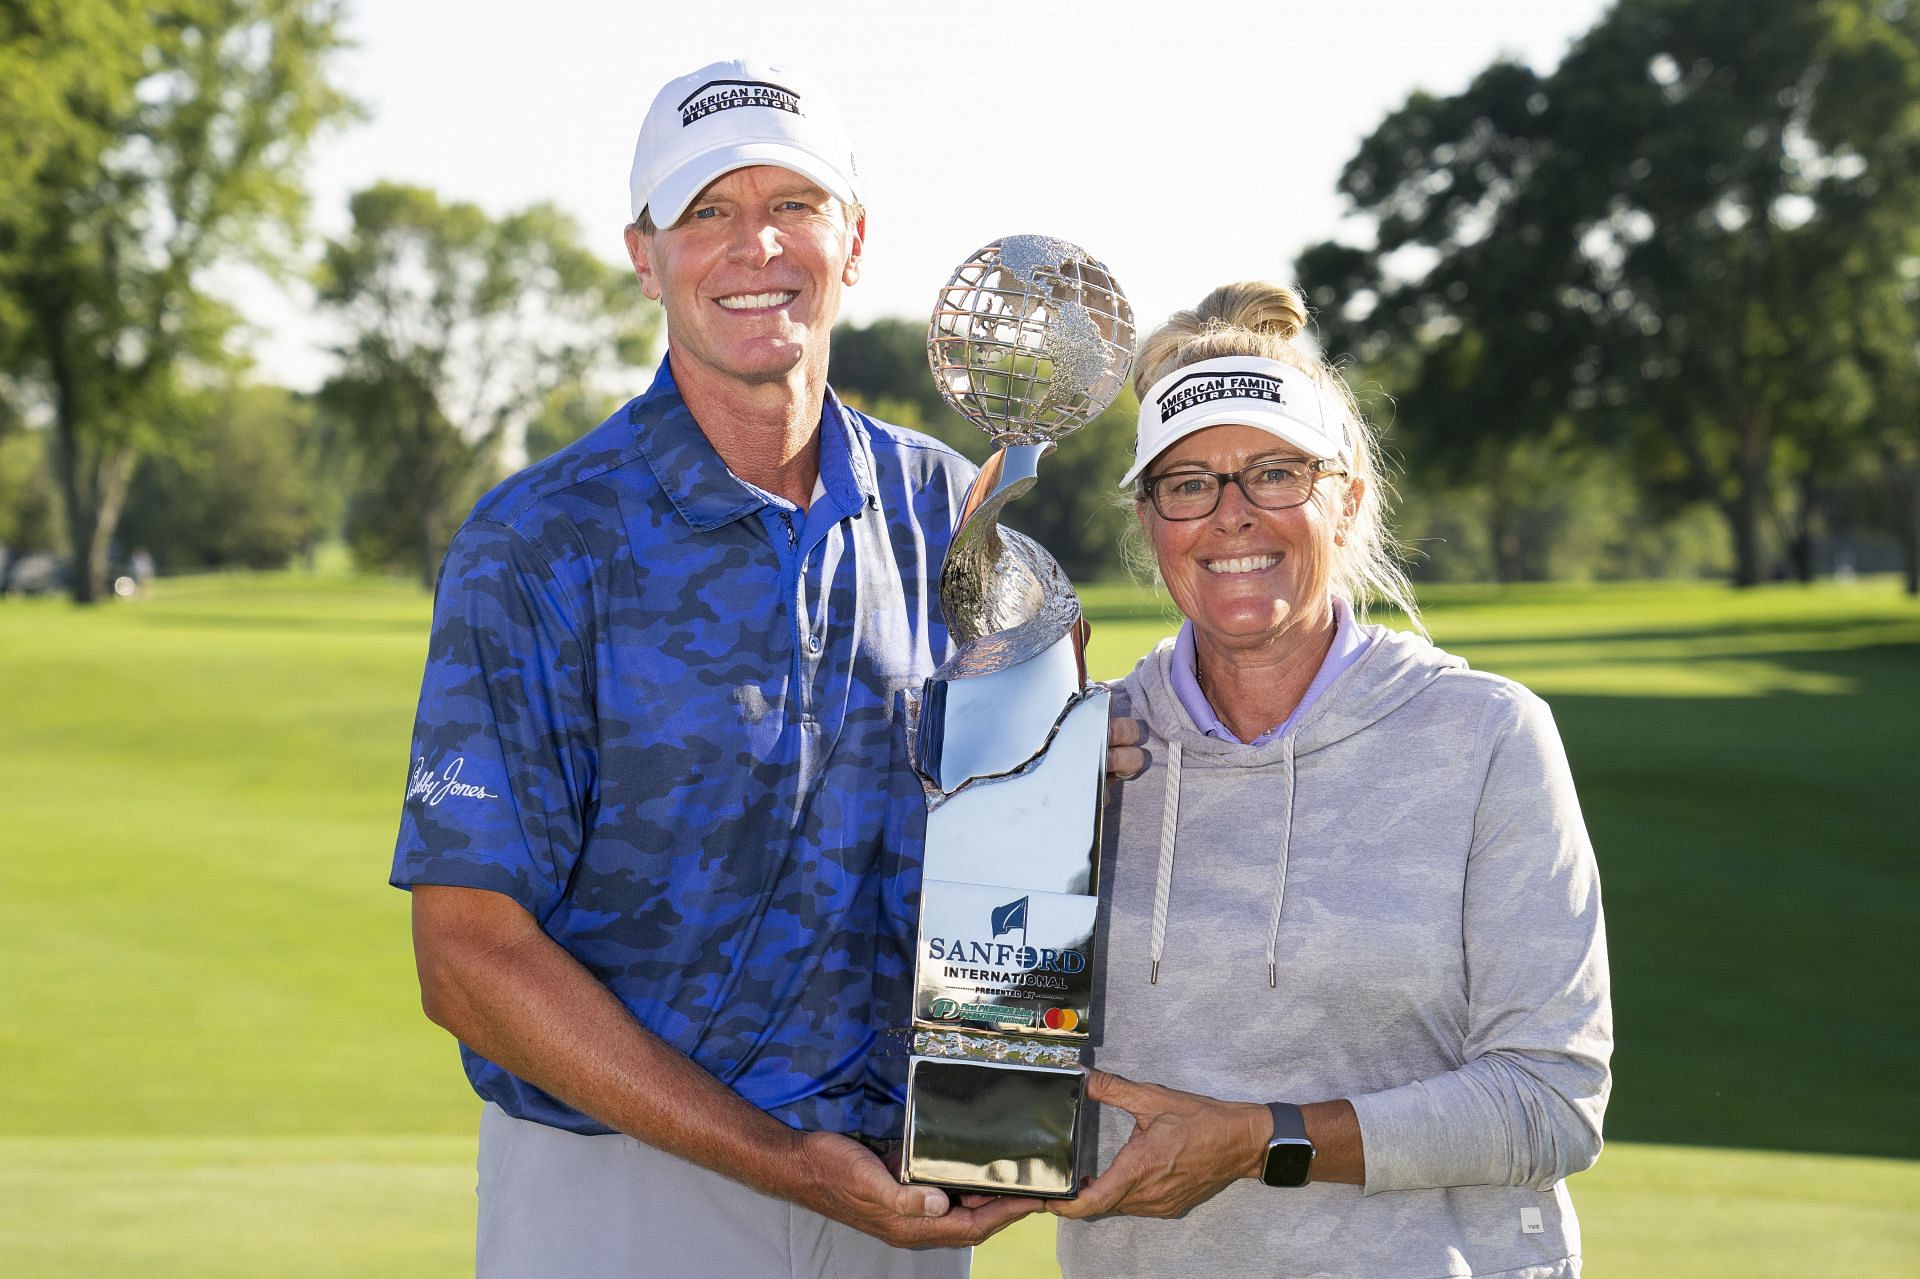 Steve and his wife Nicki Stricker with Sanford International Trophy (via Getty Images)